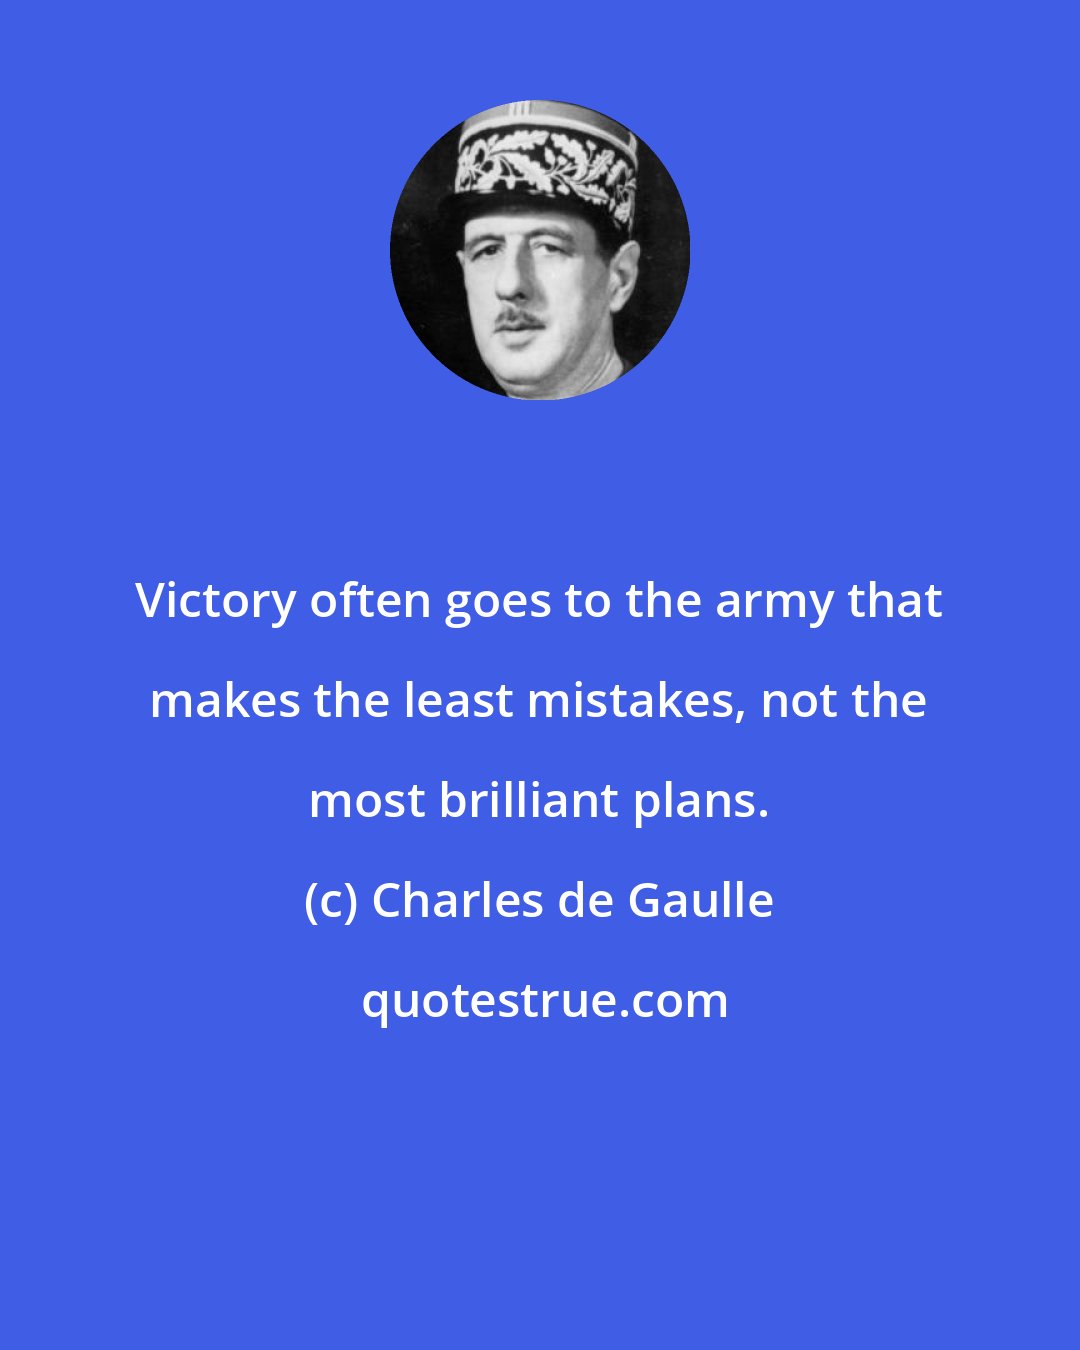 Charles de Gaulle: Victory often goes to the army that makes the least mistakes, not the most brilliant plans.